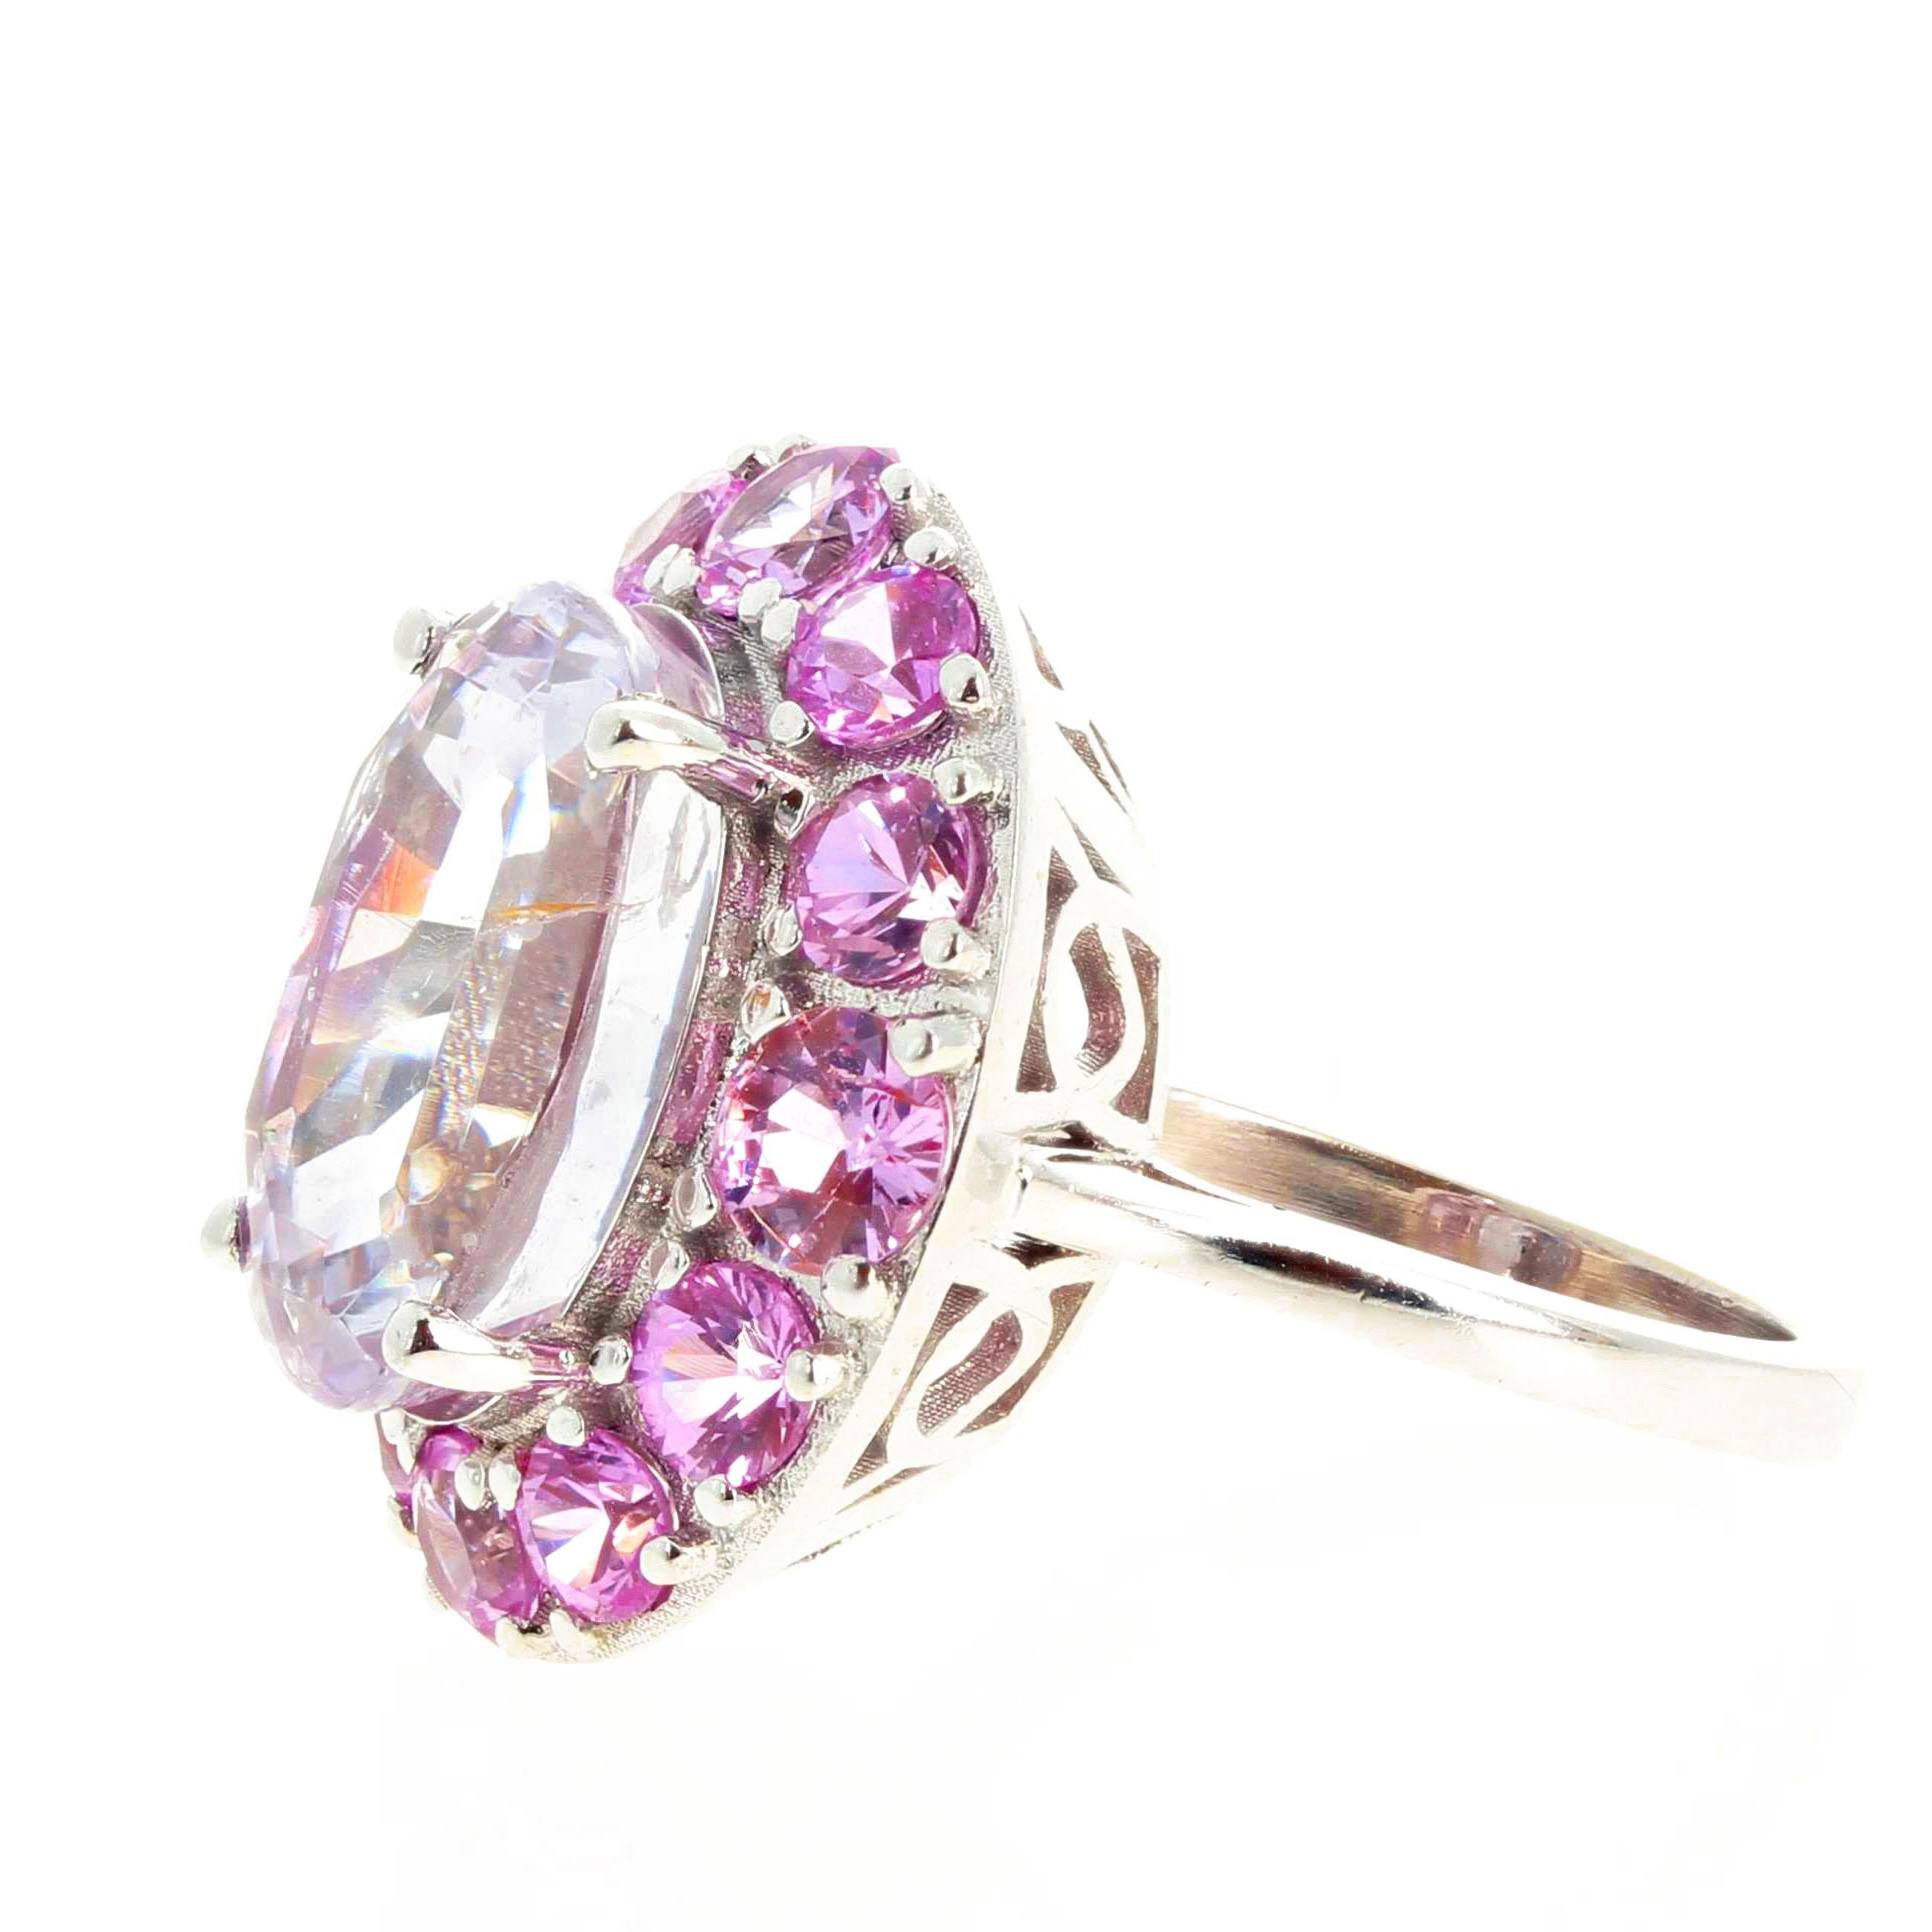 This ring will absolutely blow your mind ! In all of my design years I have rarely come upon a gemstone as beautiful and CLEAR as this Kunzite.  Magnificent glowing natural 10 carat pink Kunzite enhanced with glittering natural pink Sapphires set in